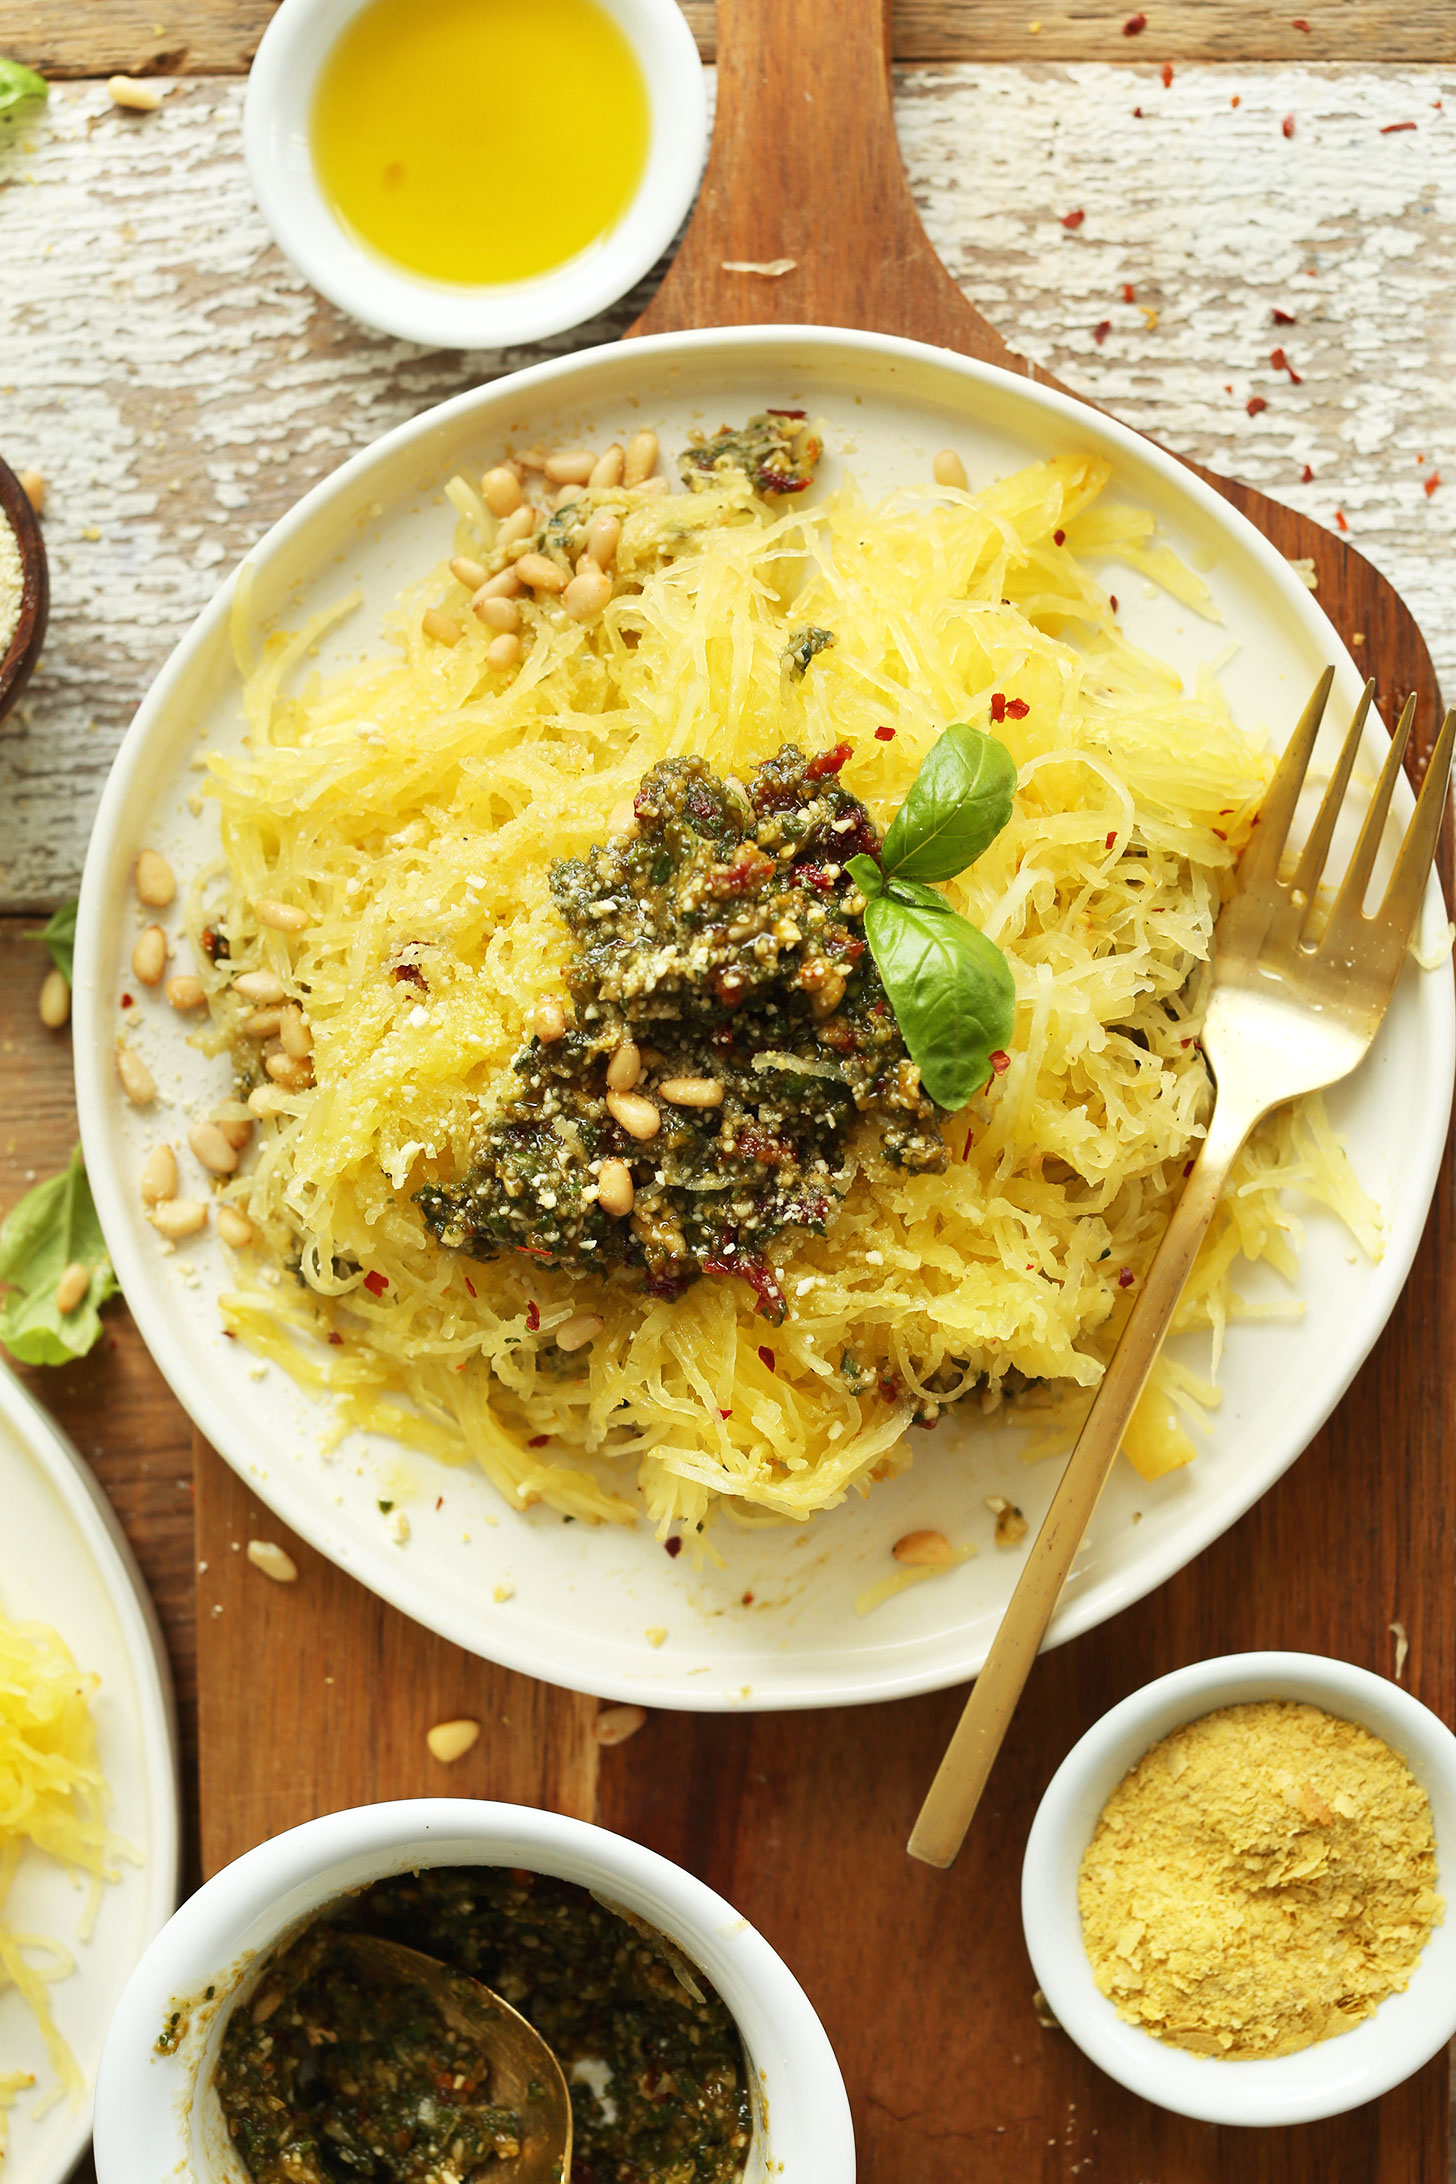 Big serving of Spaghetti Squash Pasta with Pesto for a simple vegan dinner